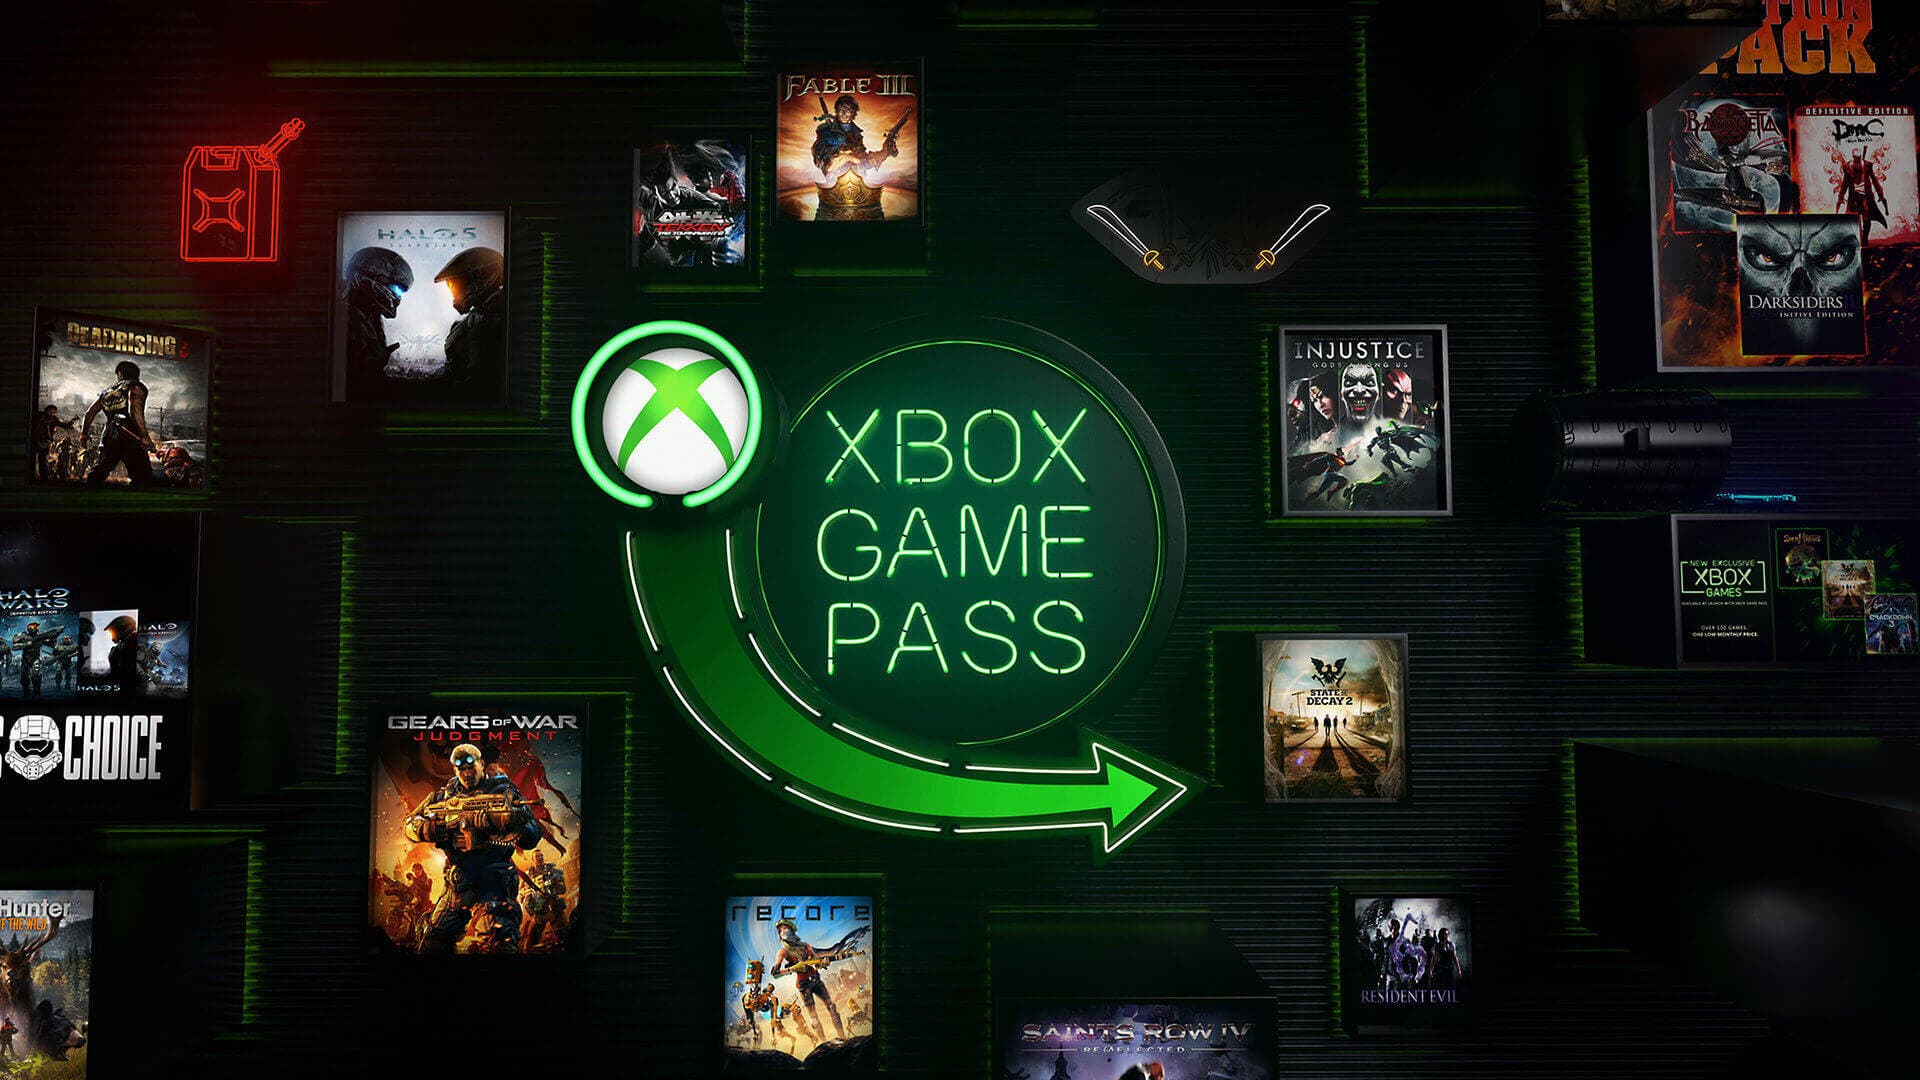 A New Game Joins Xbox Pass By Surprise Bullfrag